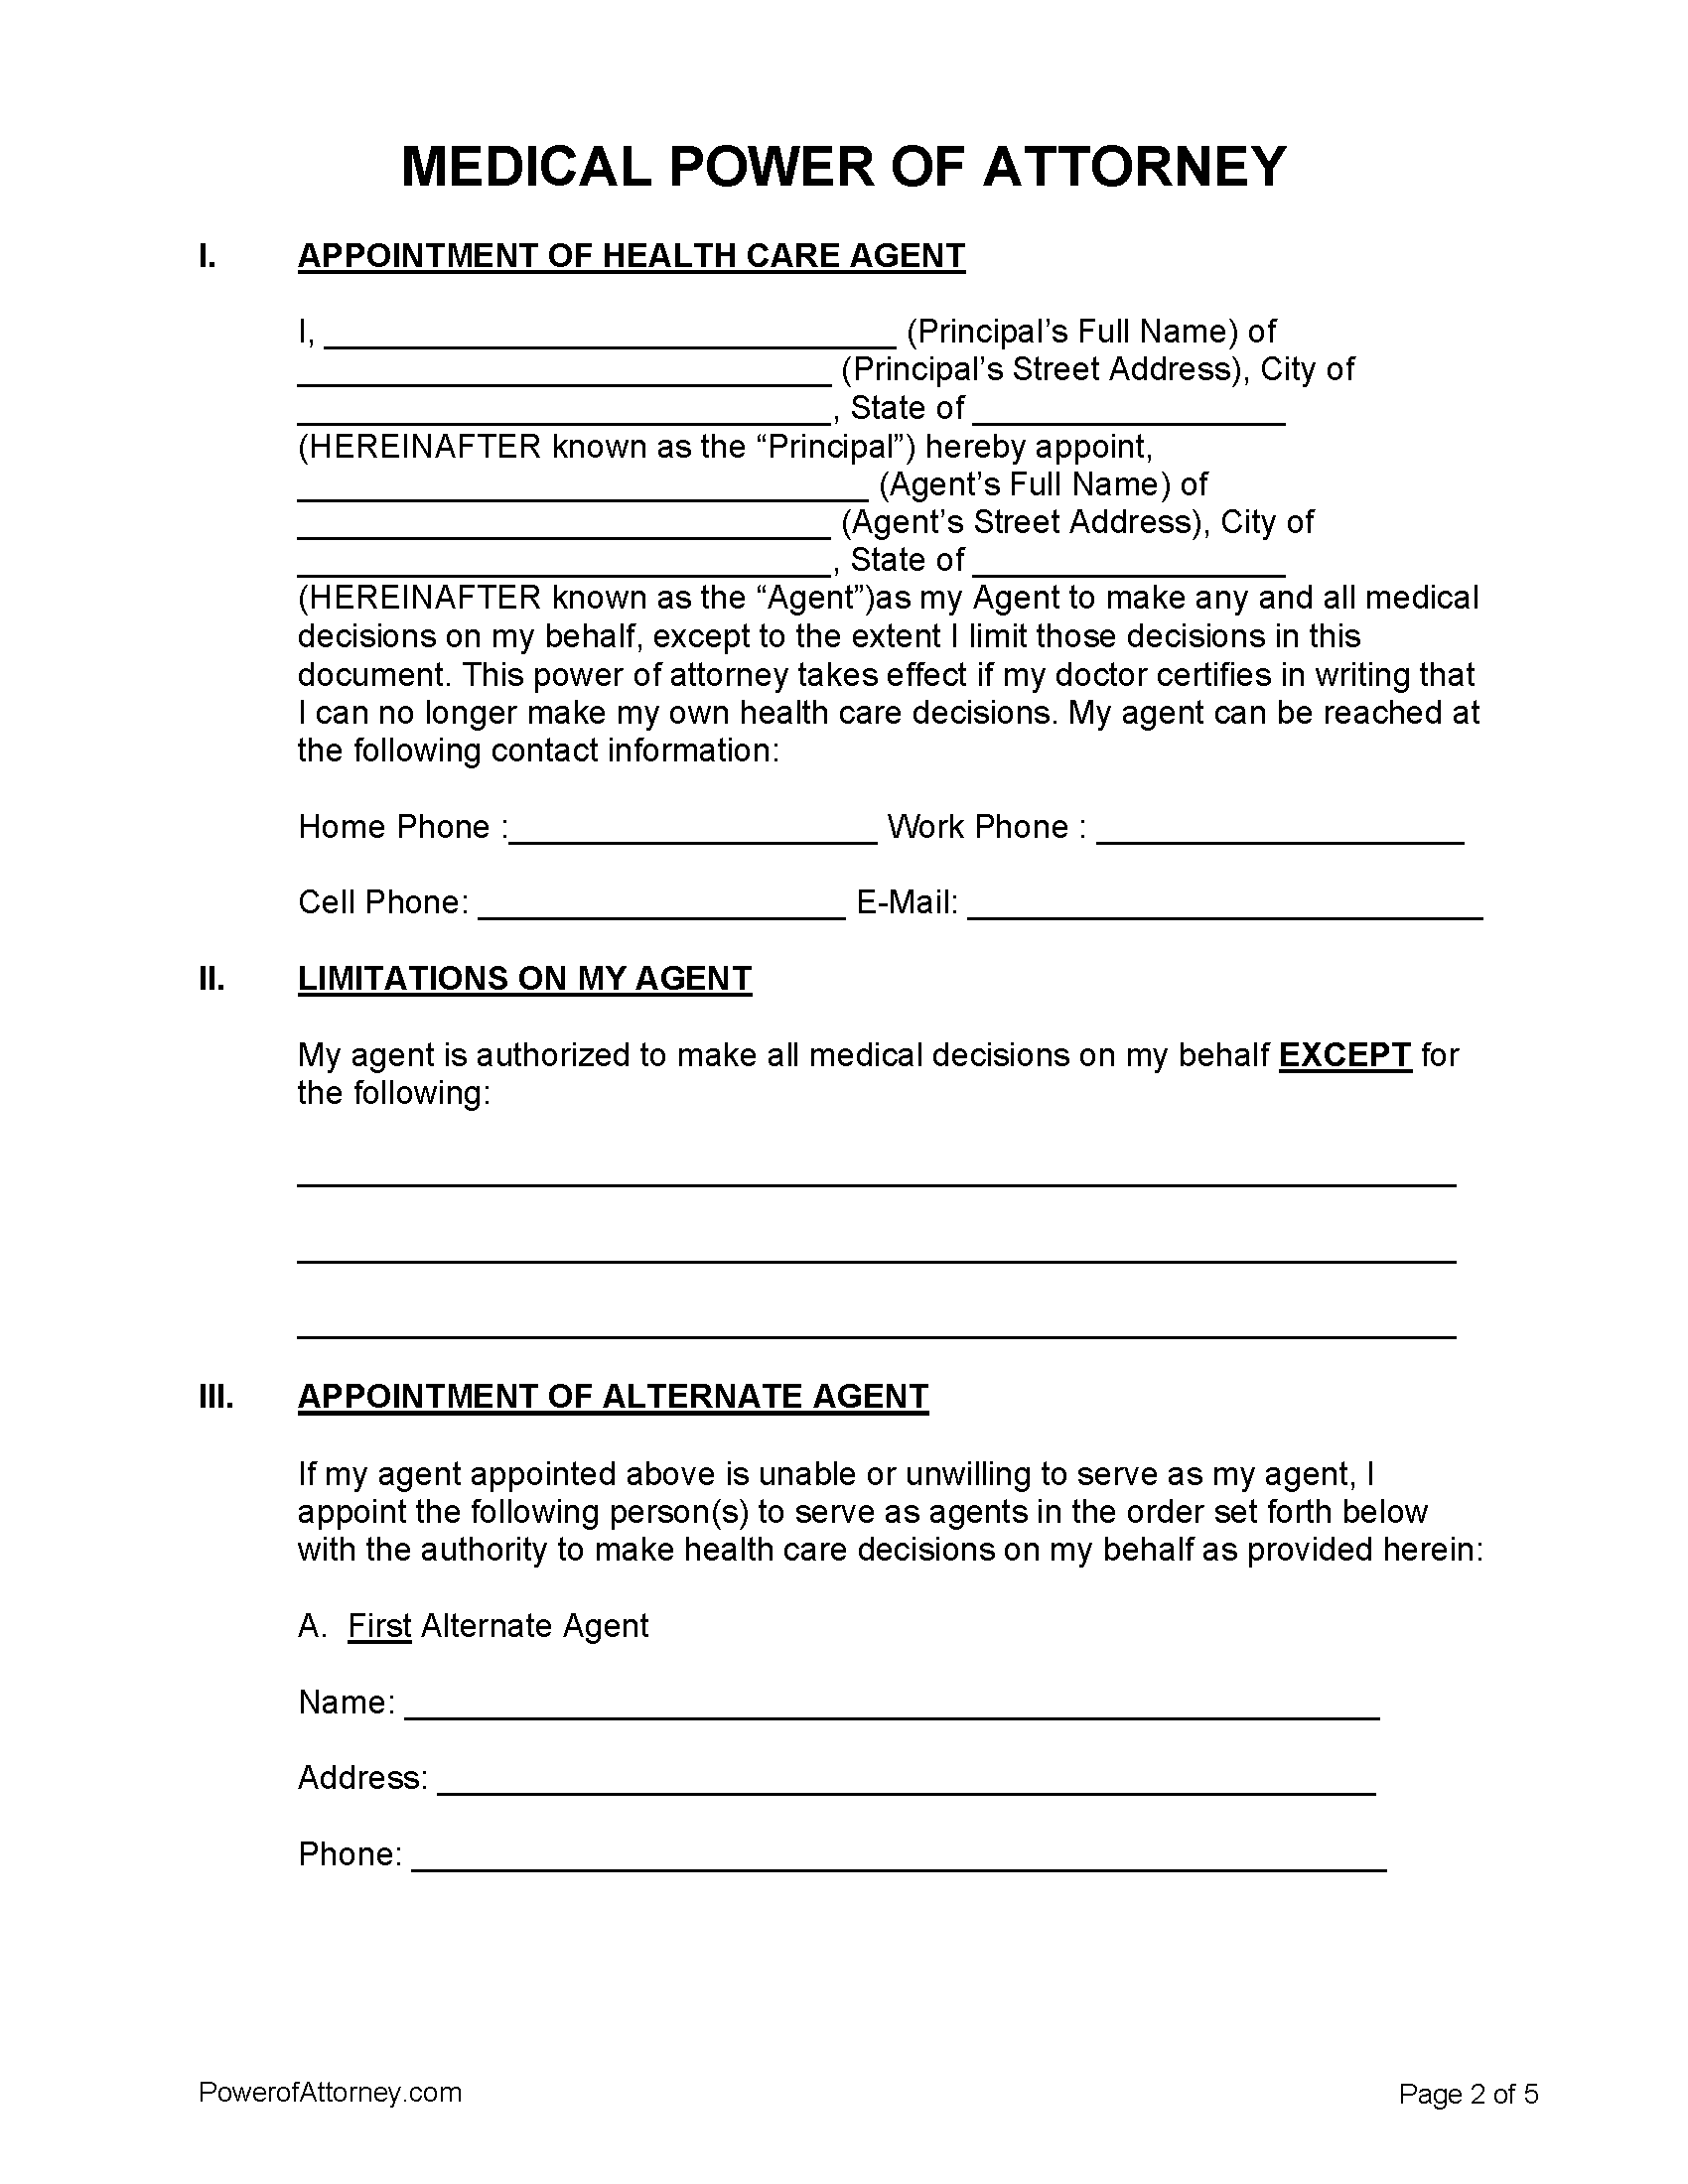 Printable Power Of Attorney Form Maryland